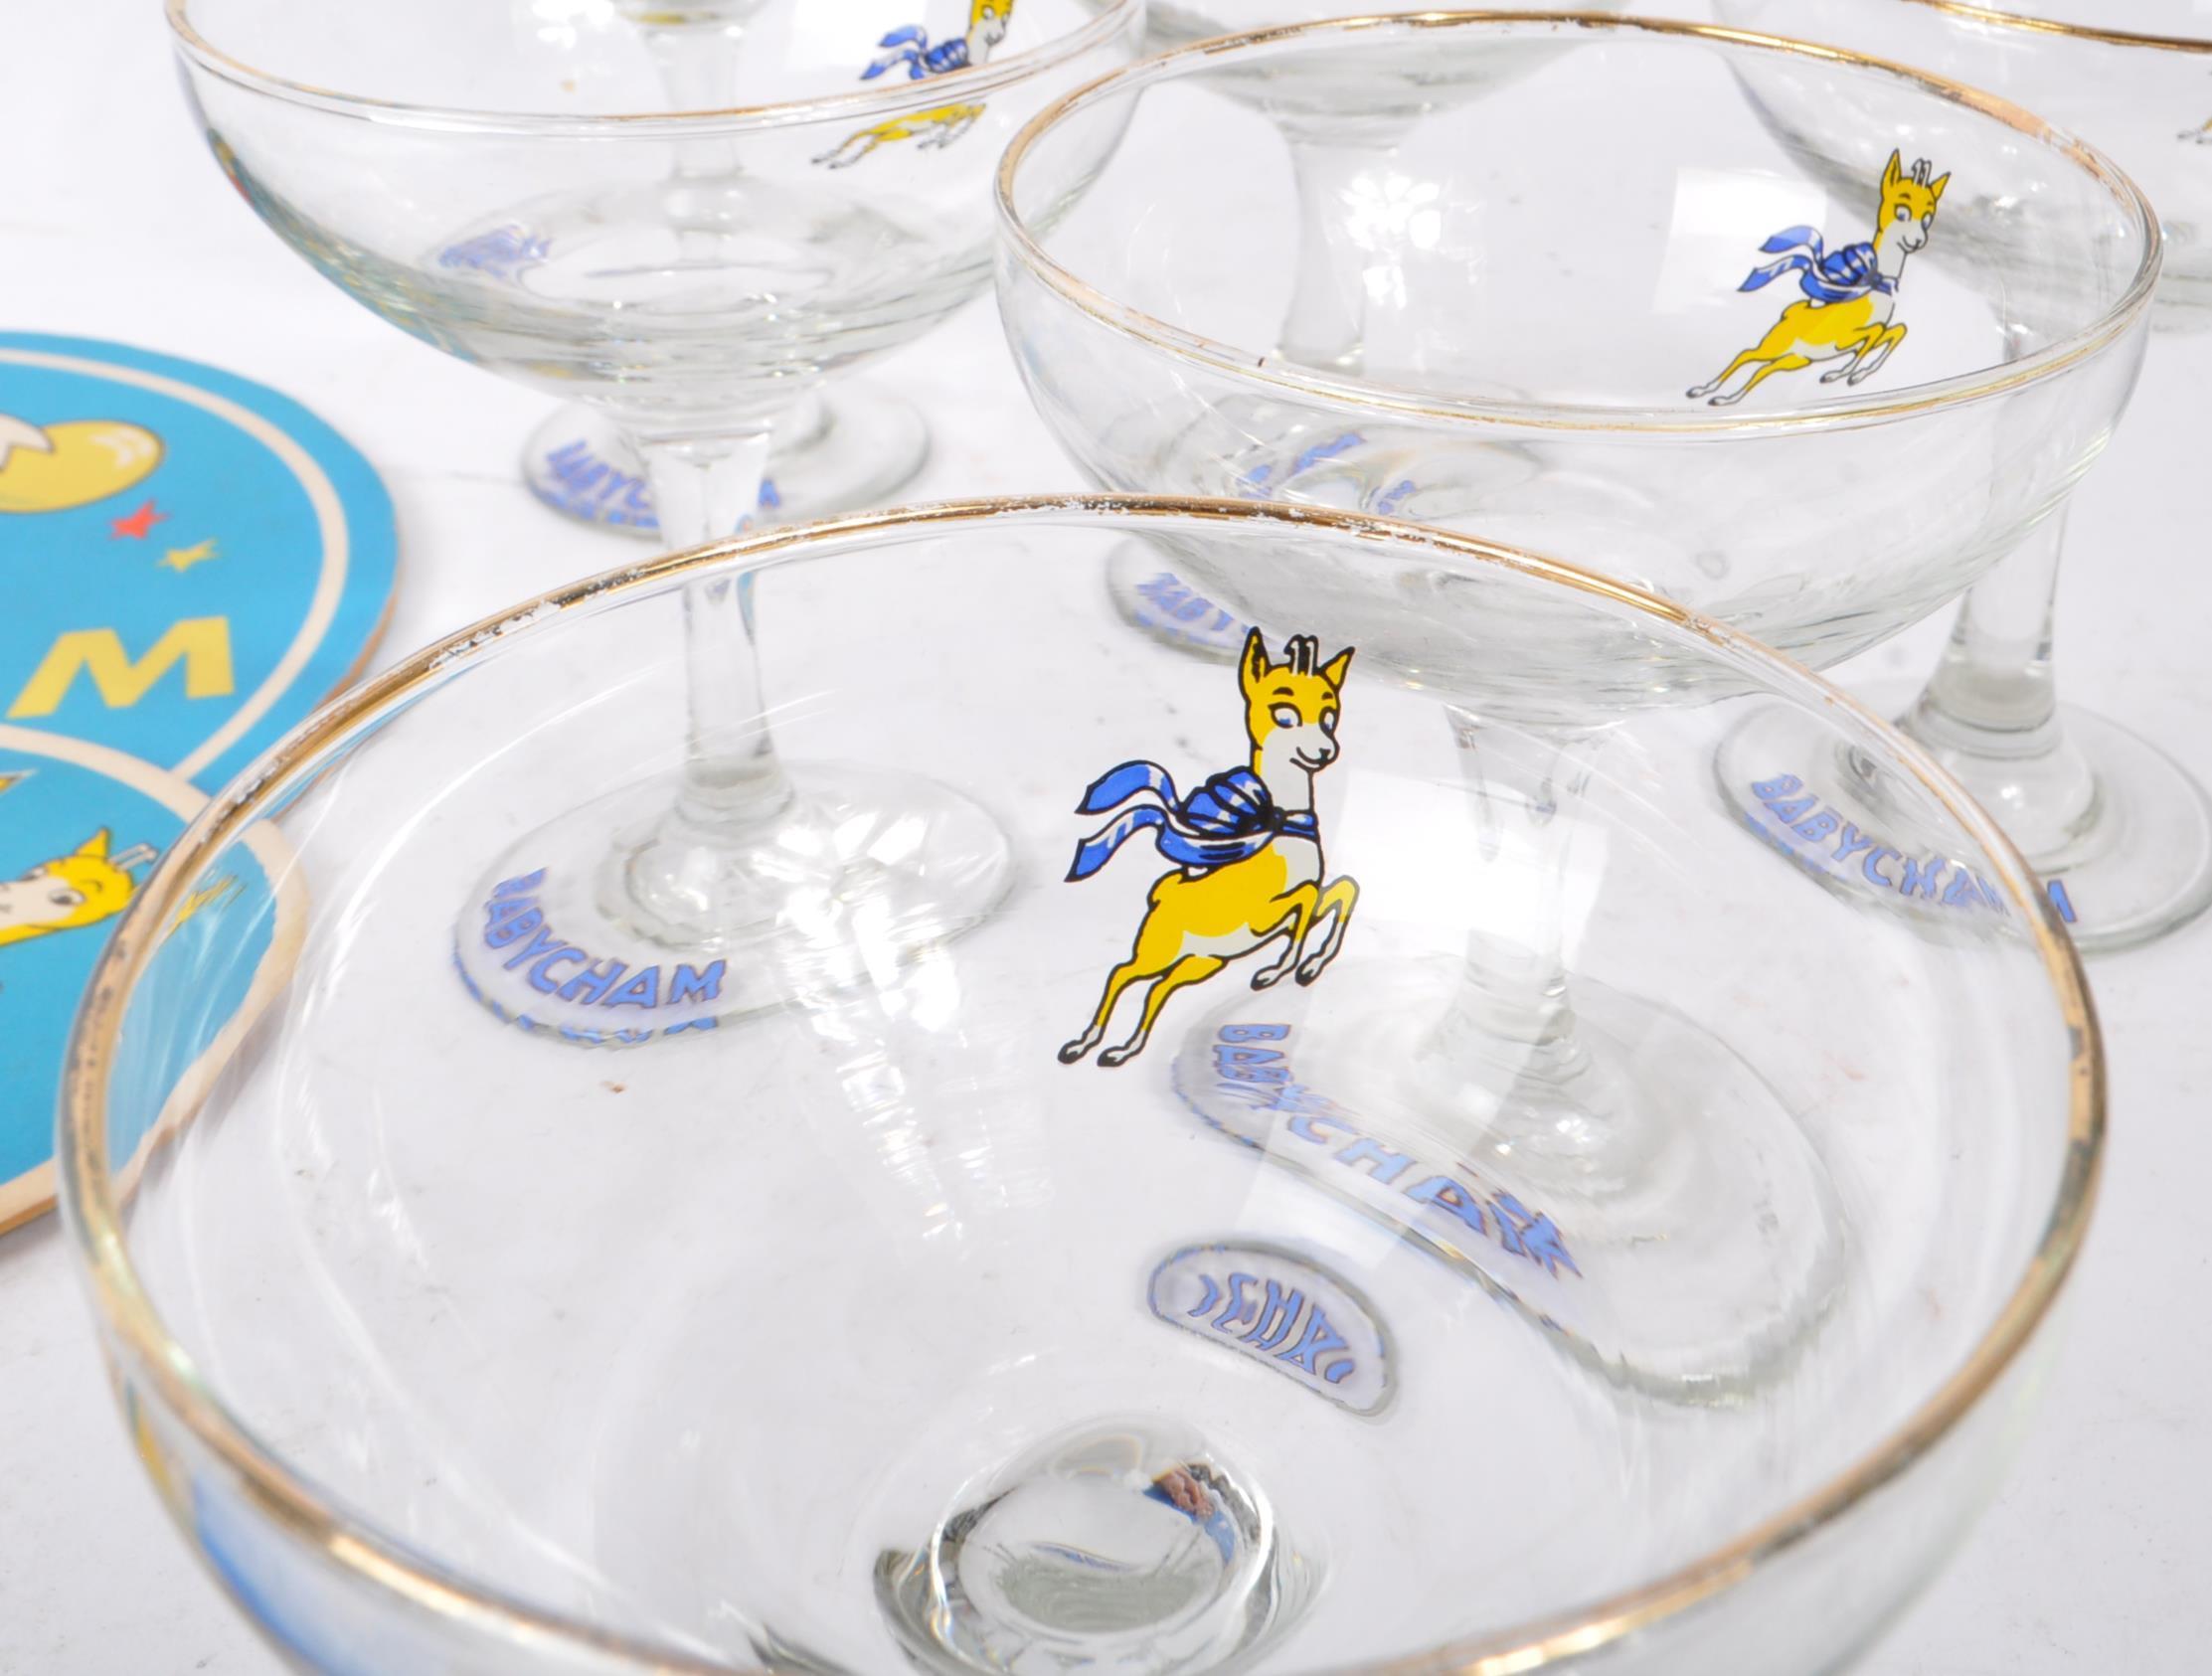 BABYCHAM - COLLECTION OF BRANDED DRINKING GLASSES - Image 7 of 7